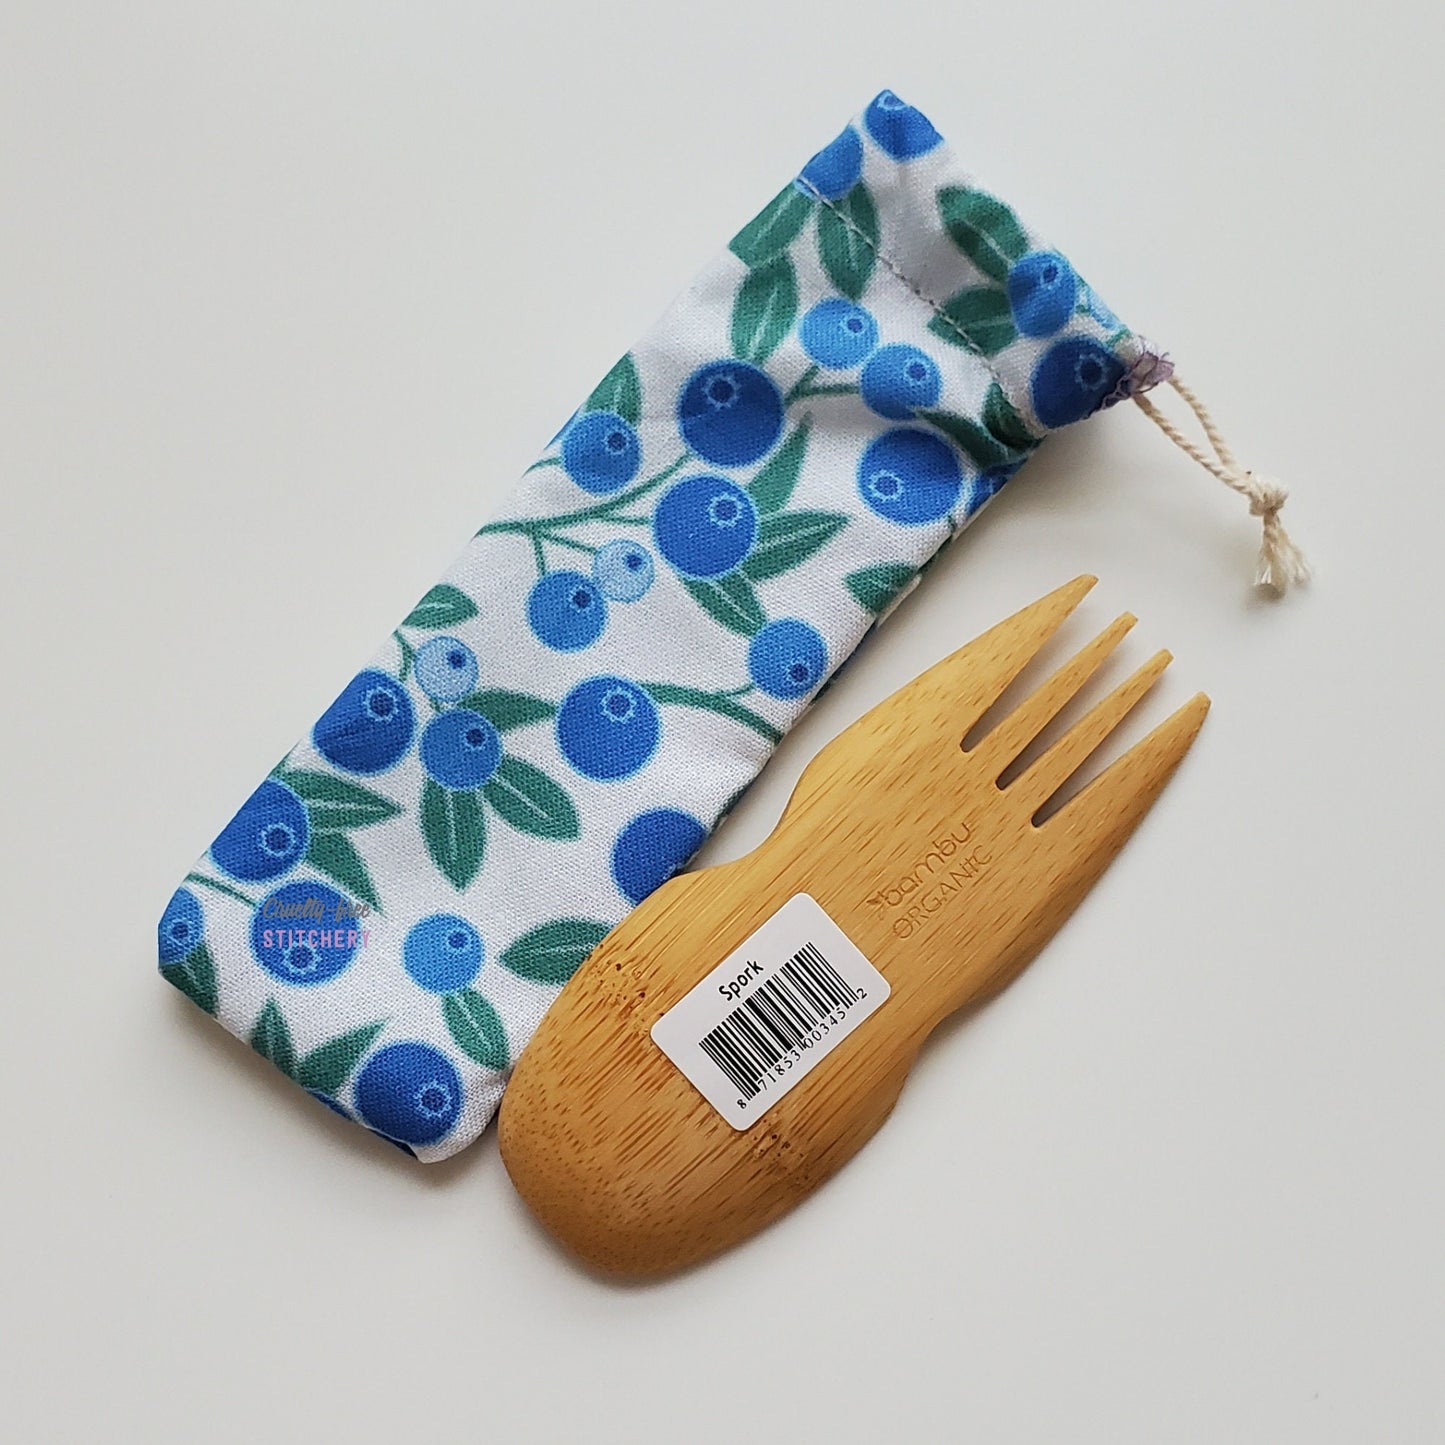 Reusable spork pouch with a blueberry print fabric. The bamboo spork is laid upside-down next to the pouch.